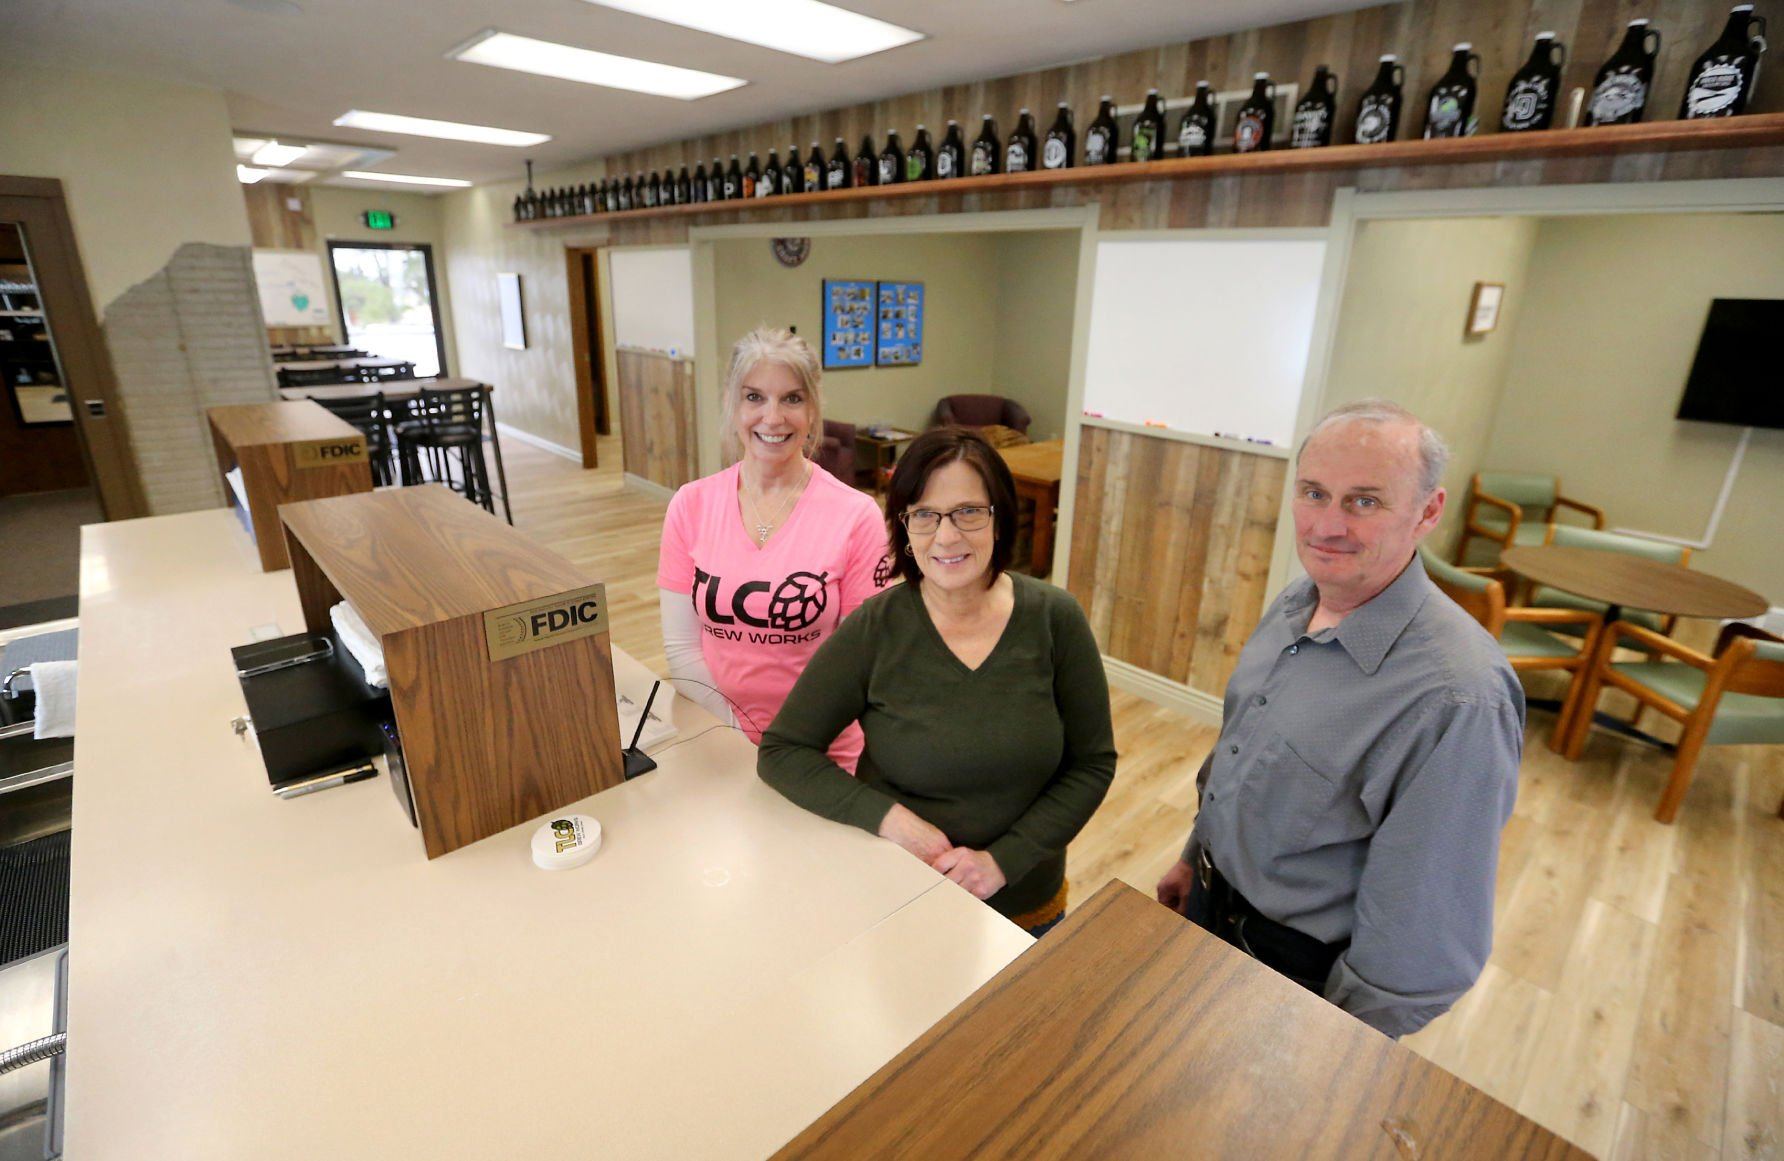 Carol Woten (from left), Linda Roling and her husband, Tom, are opening TLC Brew Works in Holy Cross, Iowa.    PHOTO CREDIT: JESSICA REILLY